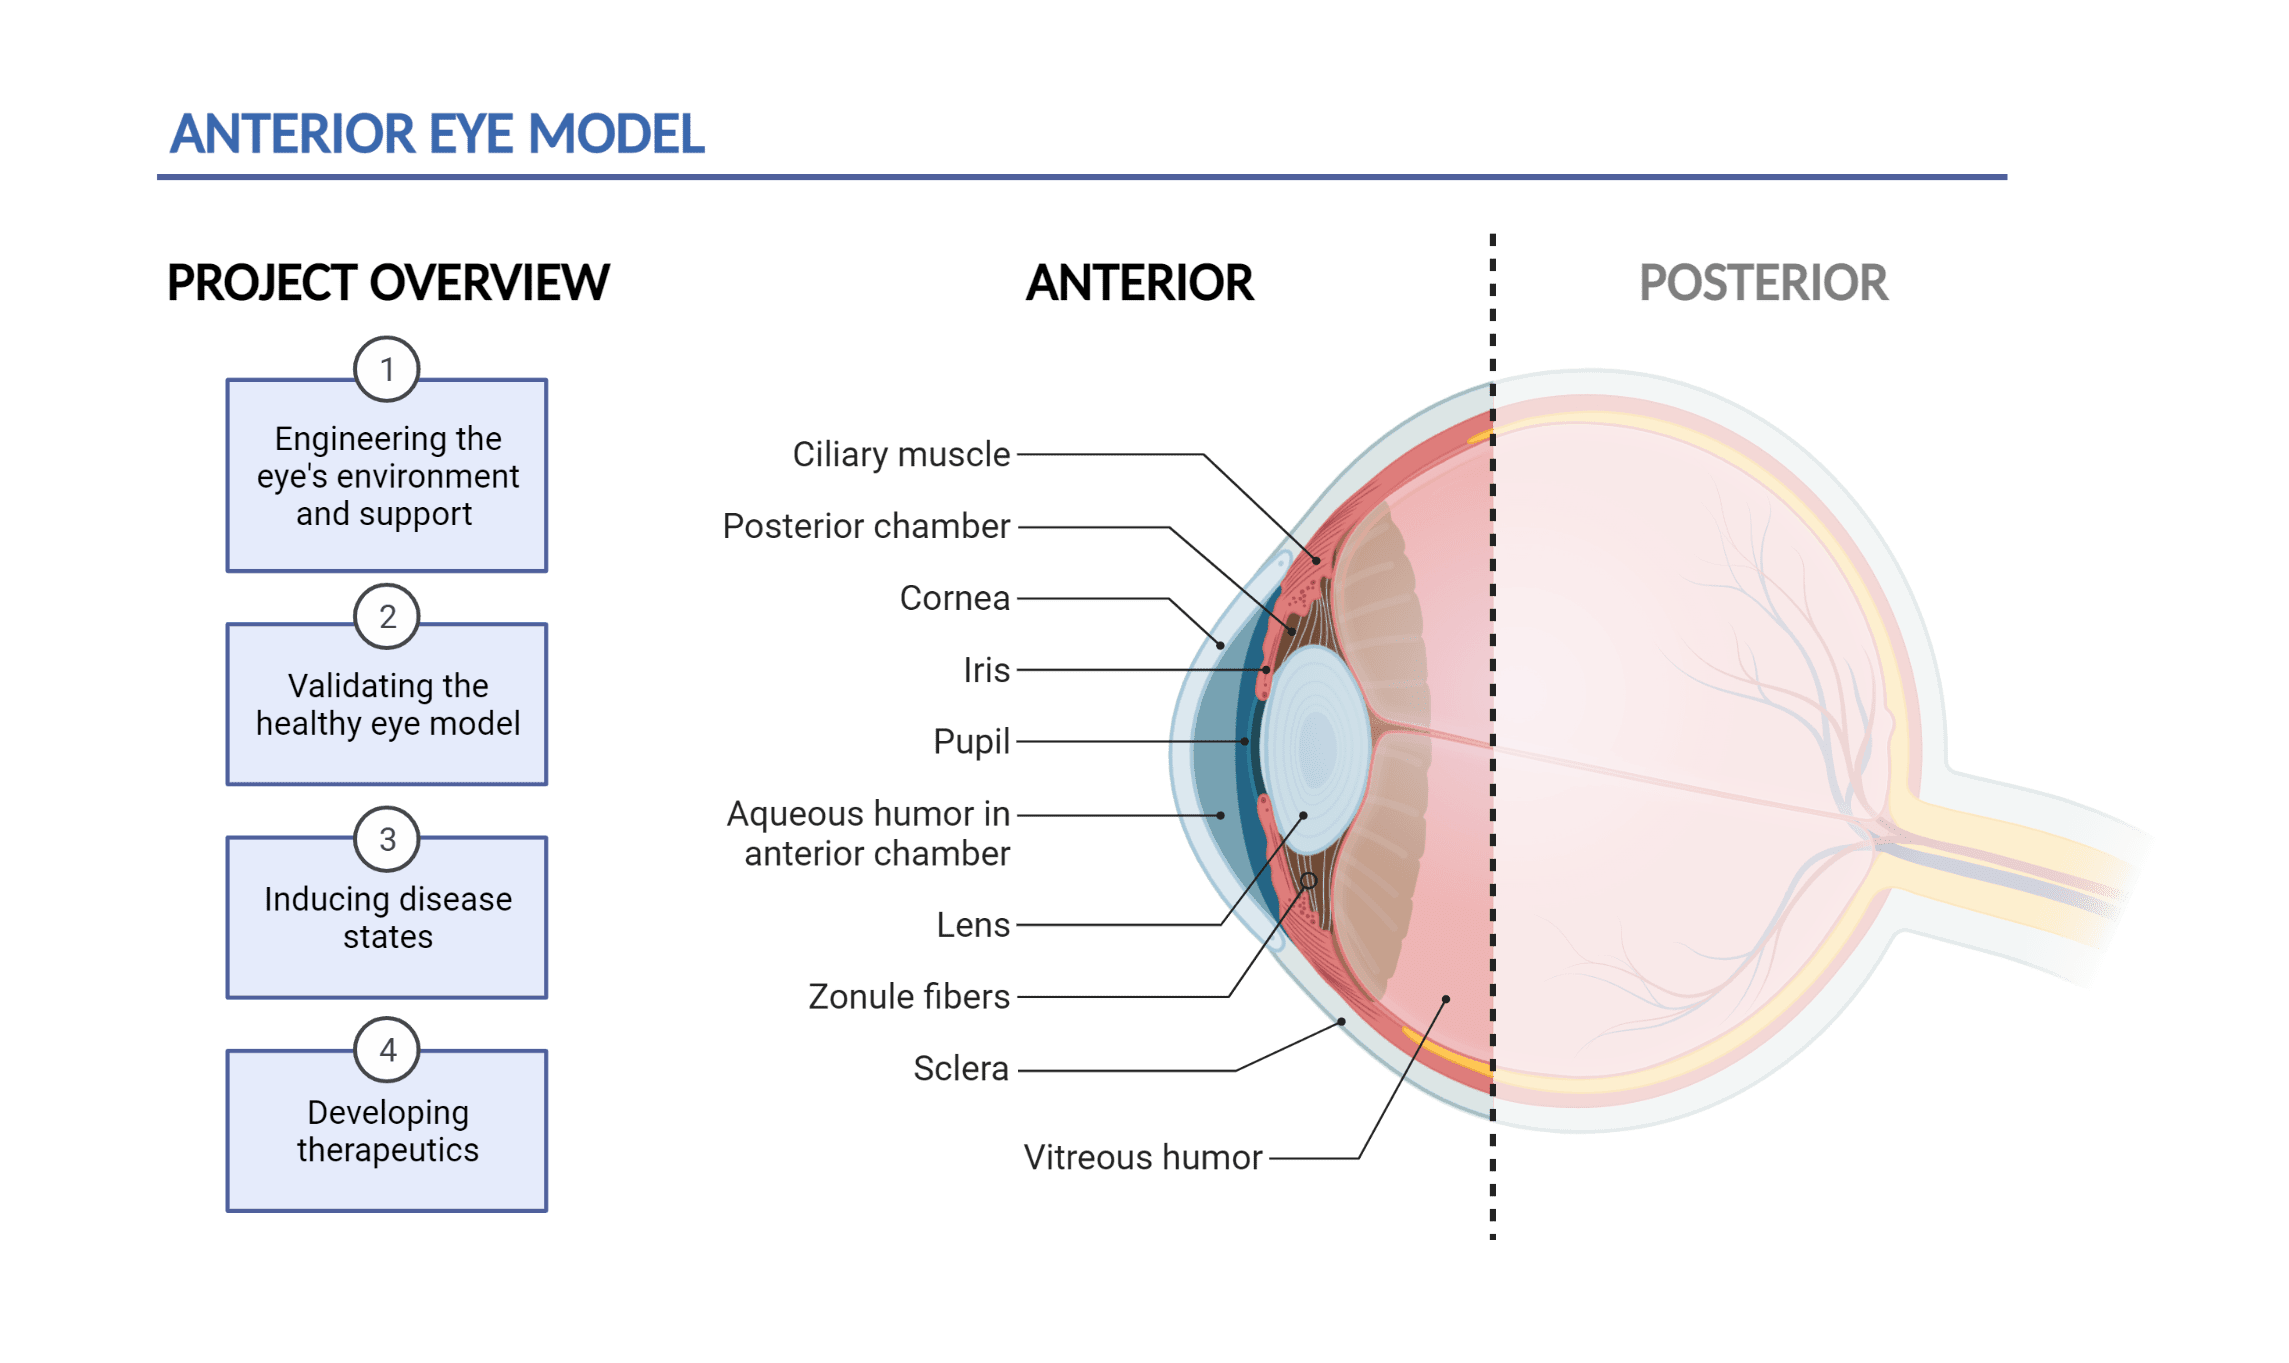 Figure 1: Anterior Eye Model (Image with Project Overview and Anatomy of the eye)